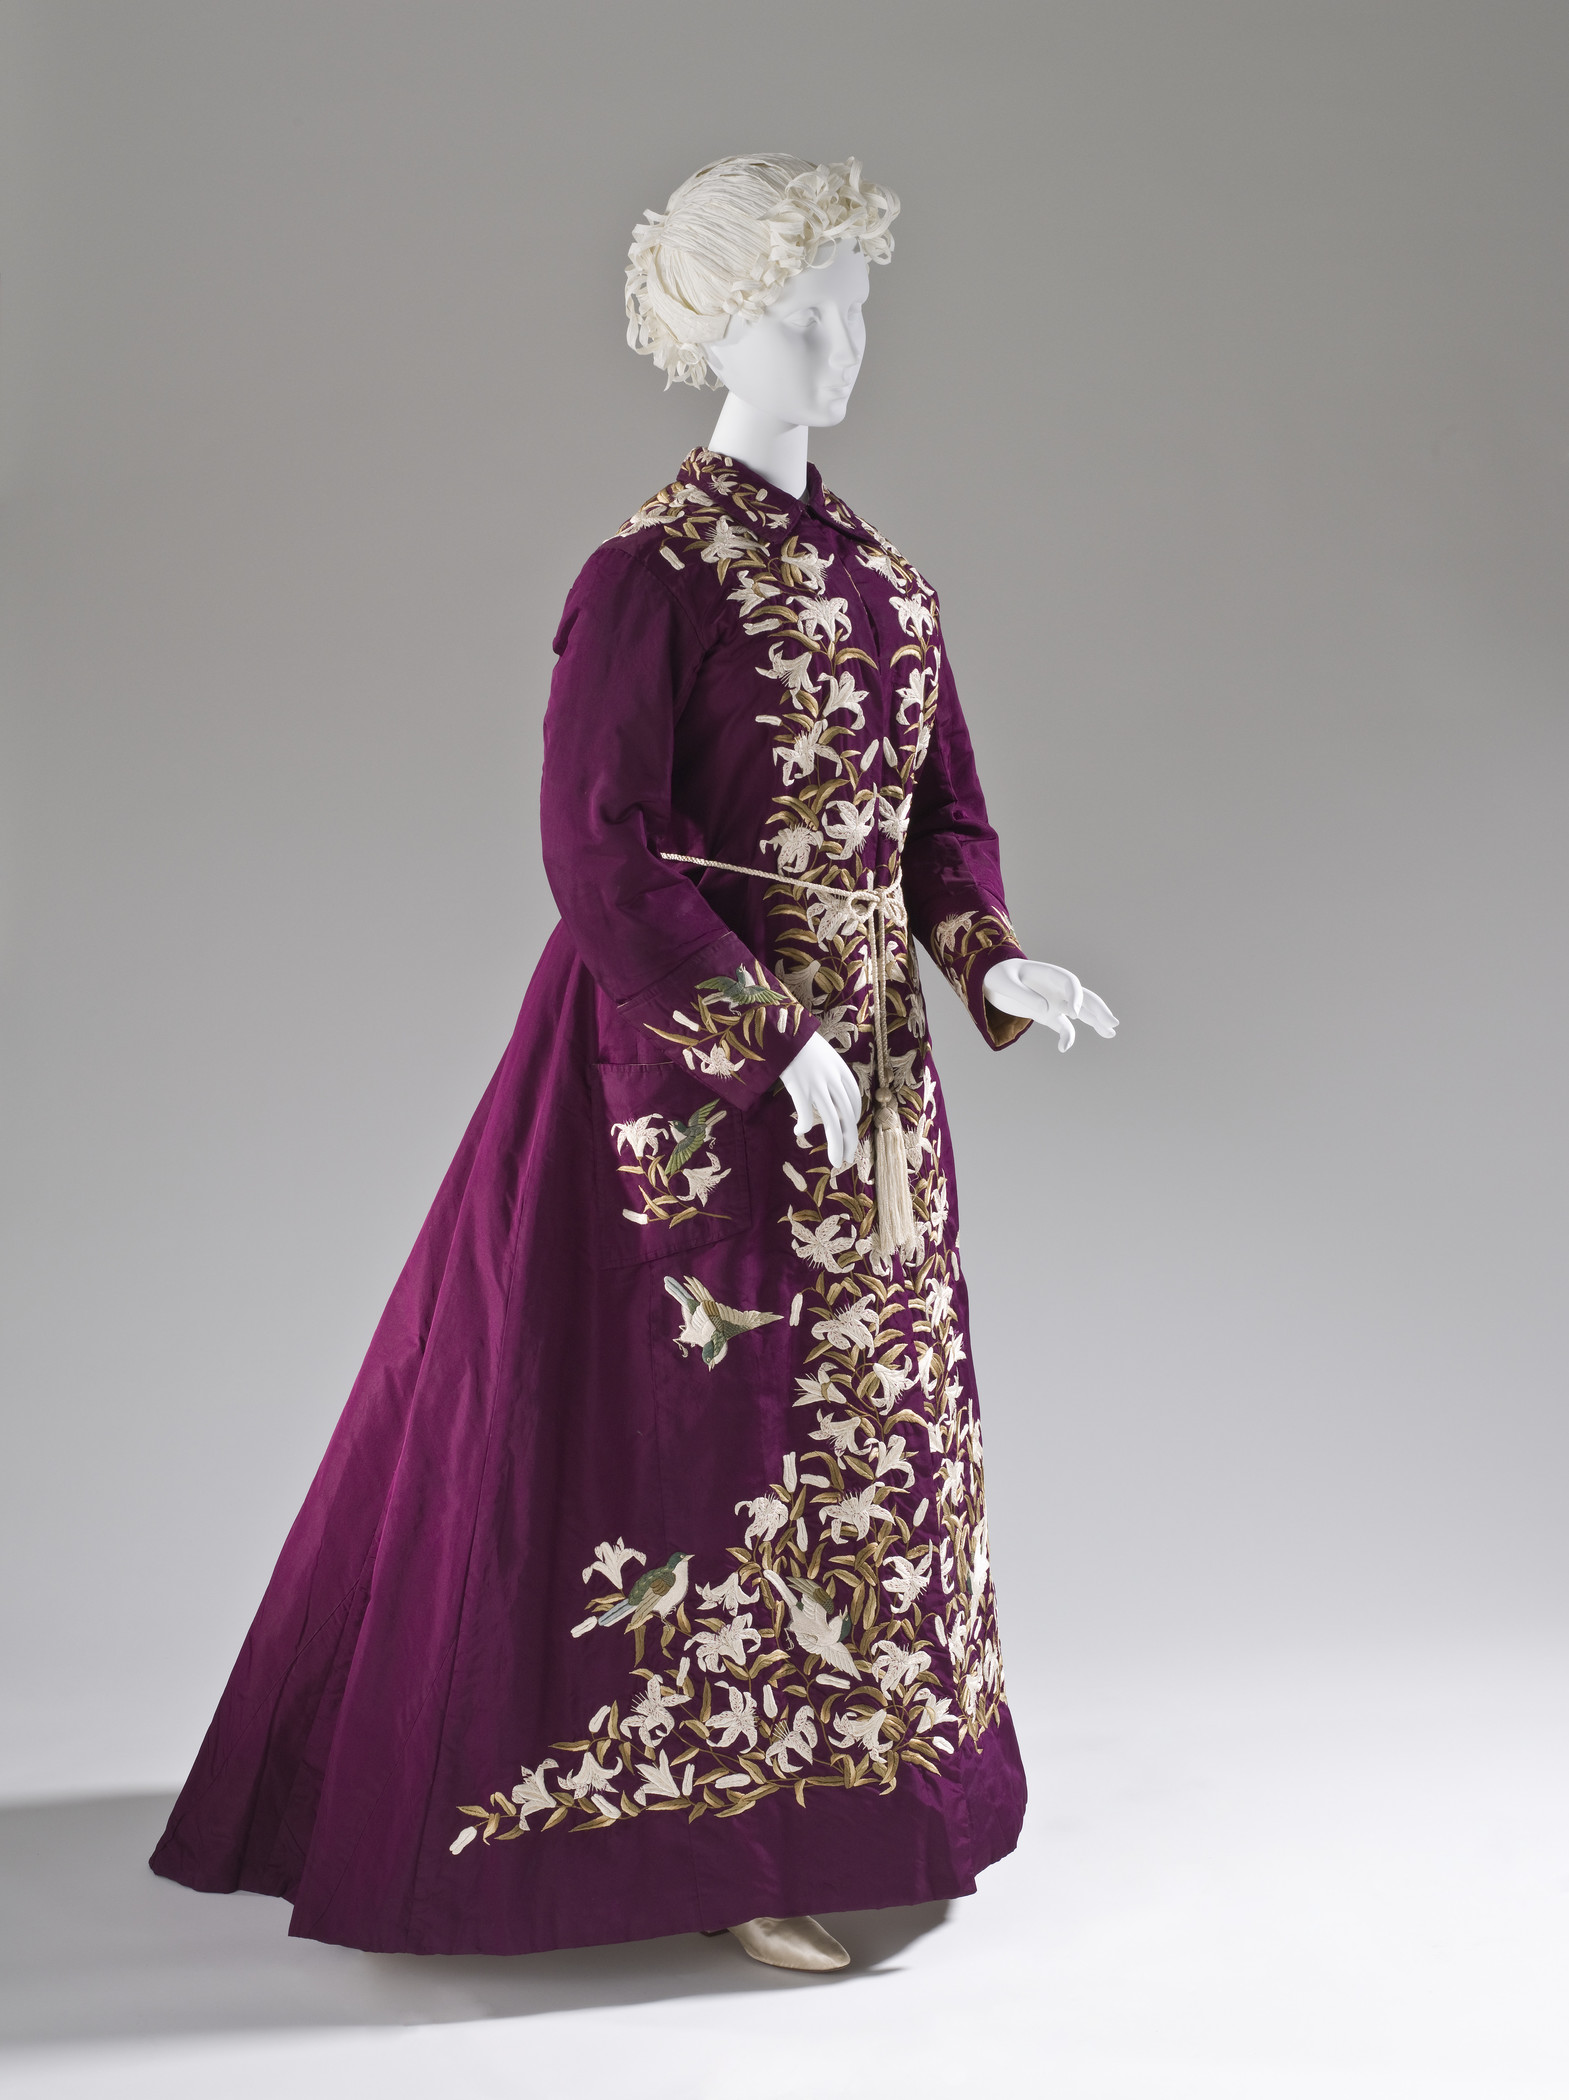 Woman’s Dressing Gown with Belt, Japan, Yokohama, for the Western market, circa 1885, silk plain weave (faille) with silk embroidery; belt: silk braided cord with tassels Belt, LACMA, M.2007.211.784a-b